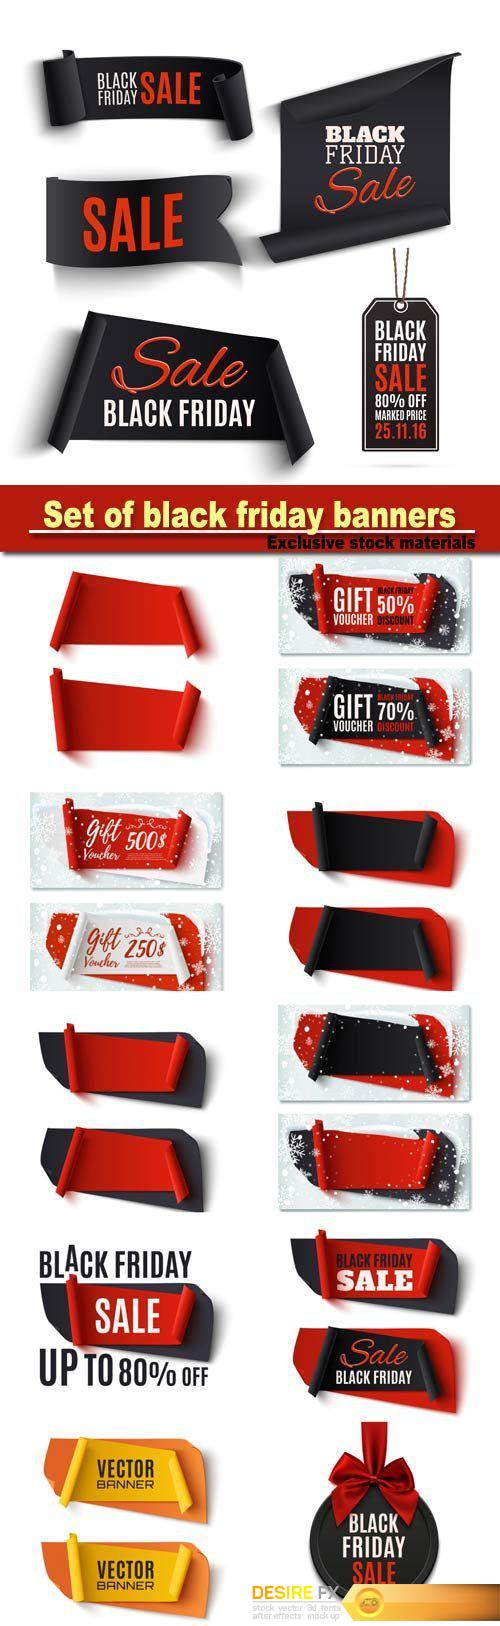 Set of black friday banners and price tags isolated on white background, vector illustration